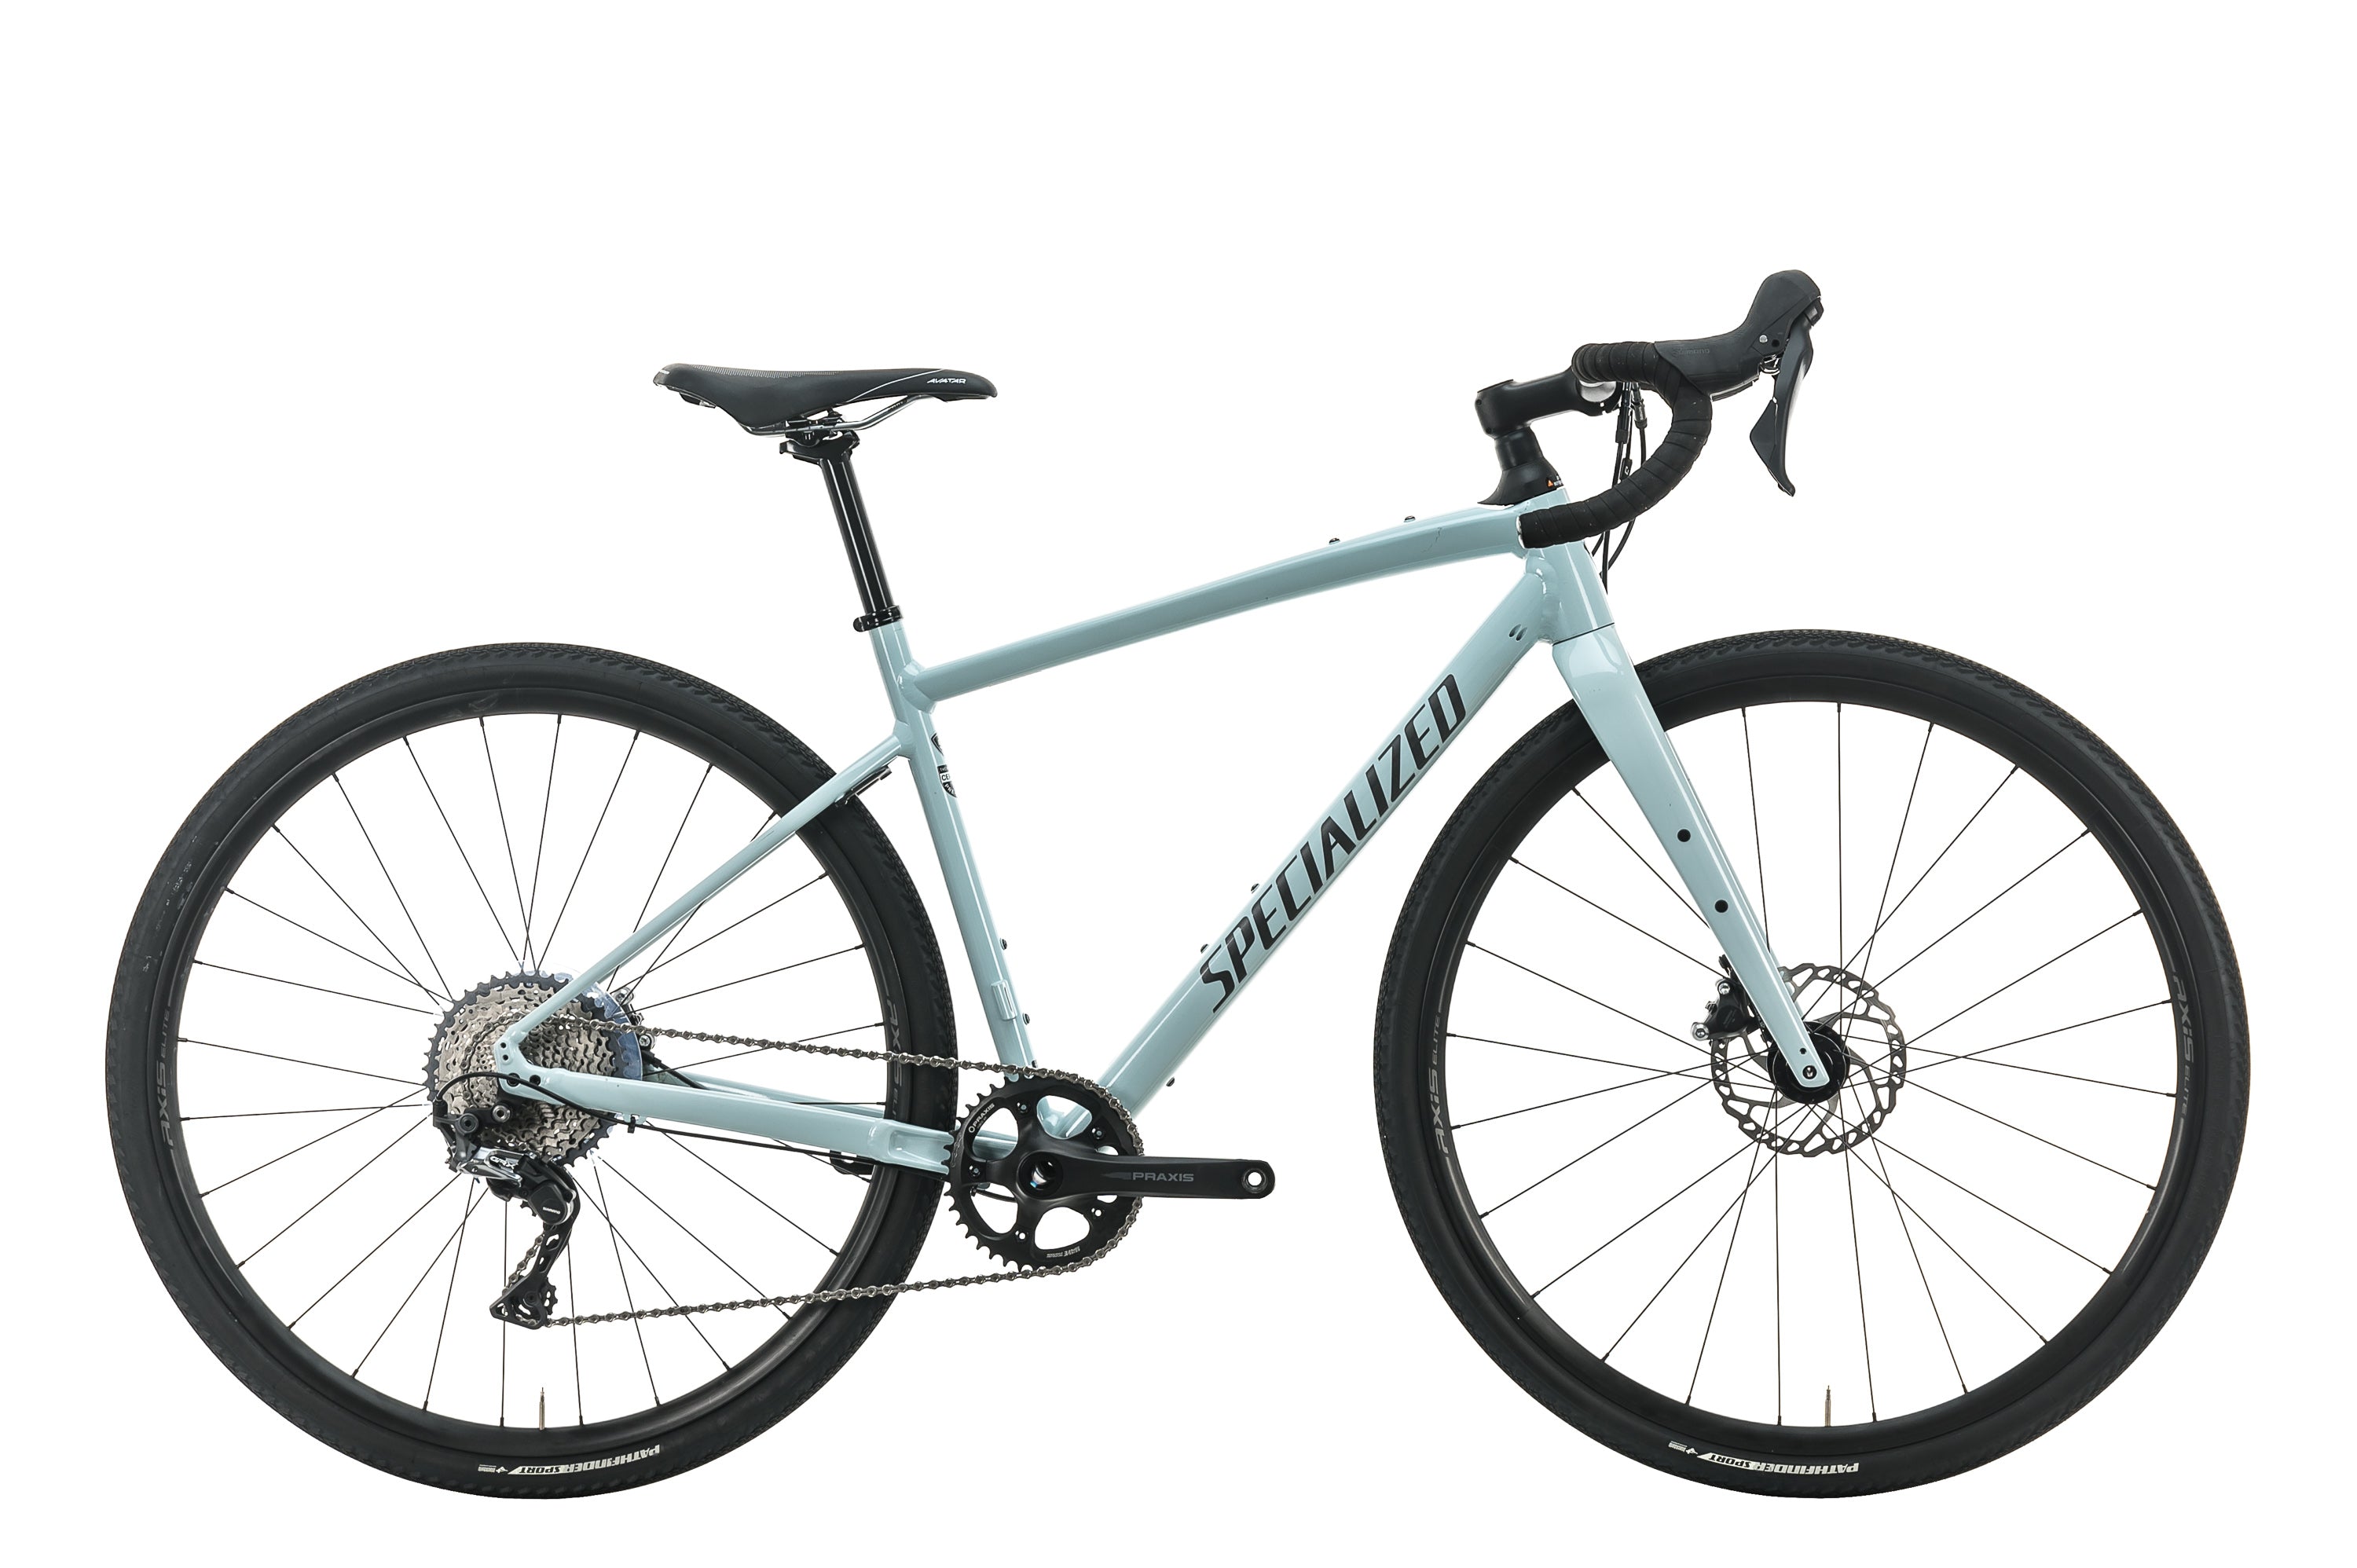 Used Gravel Bikes For Sale - Certified Pre-Owned & New | Carbon 